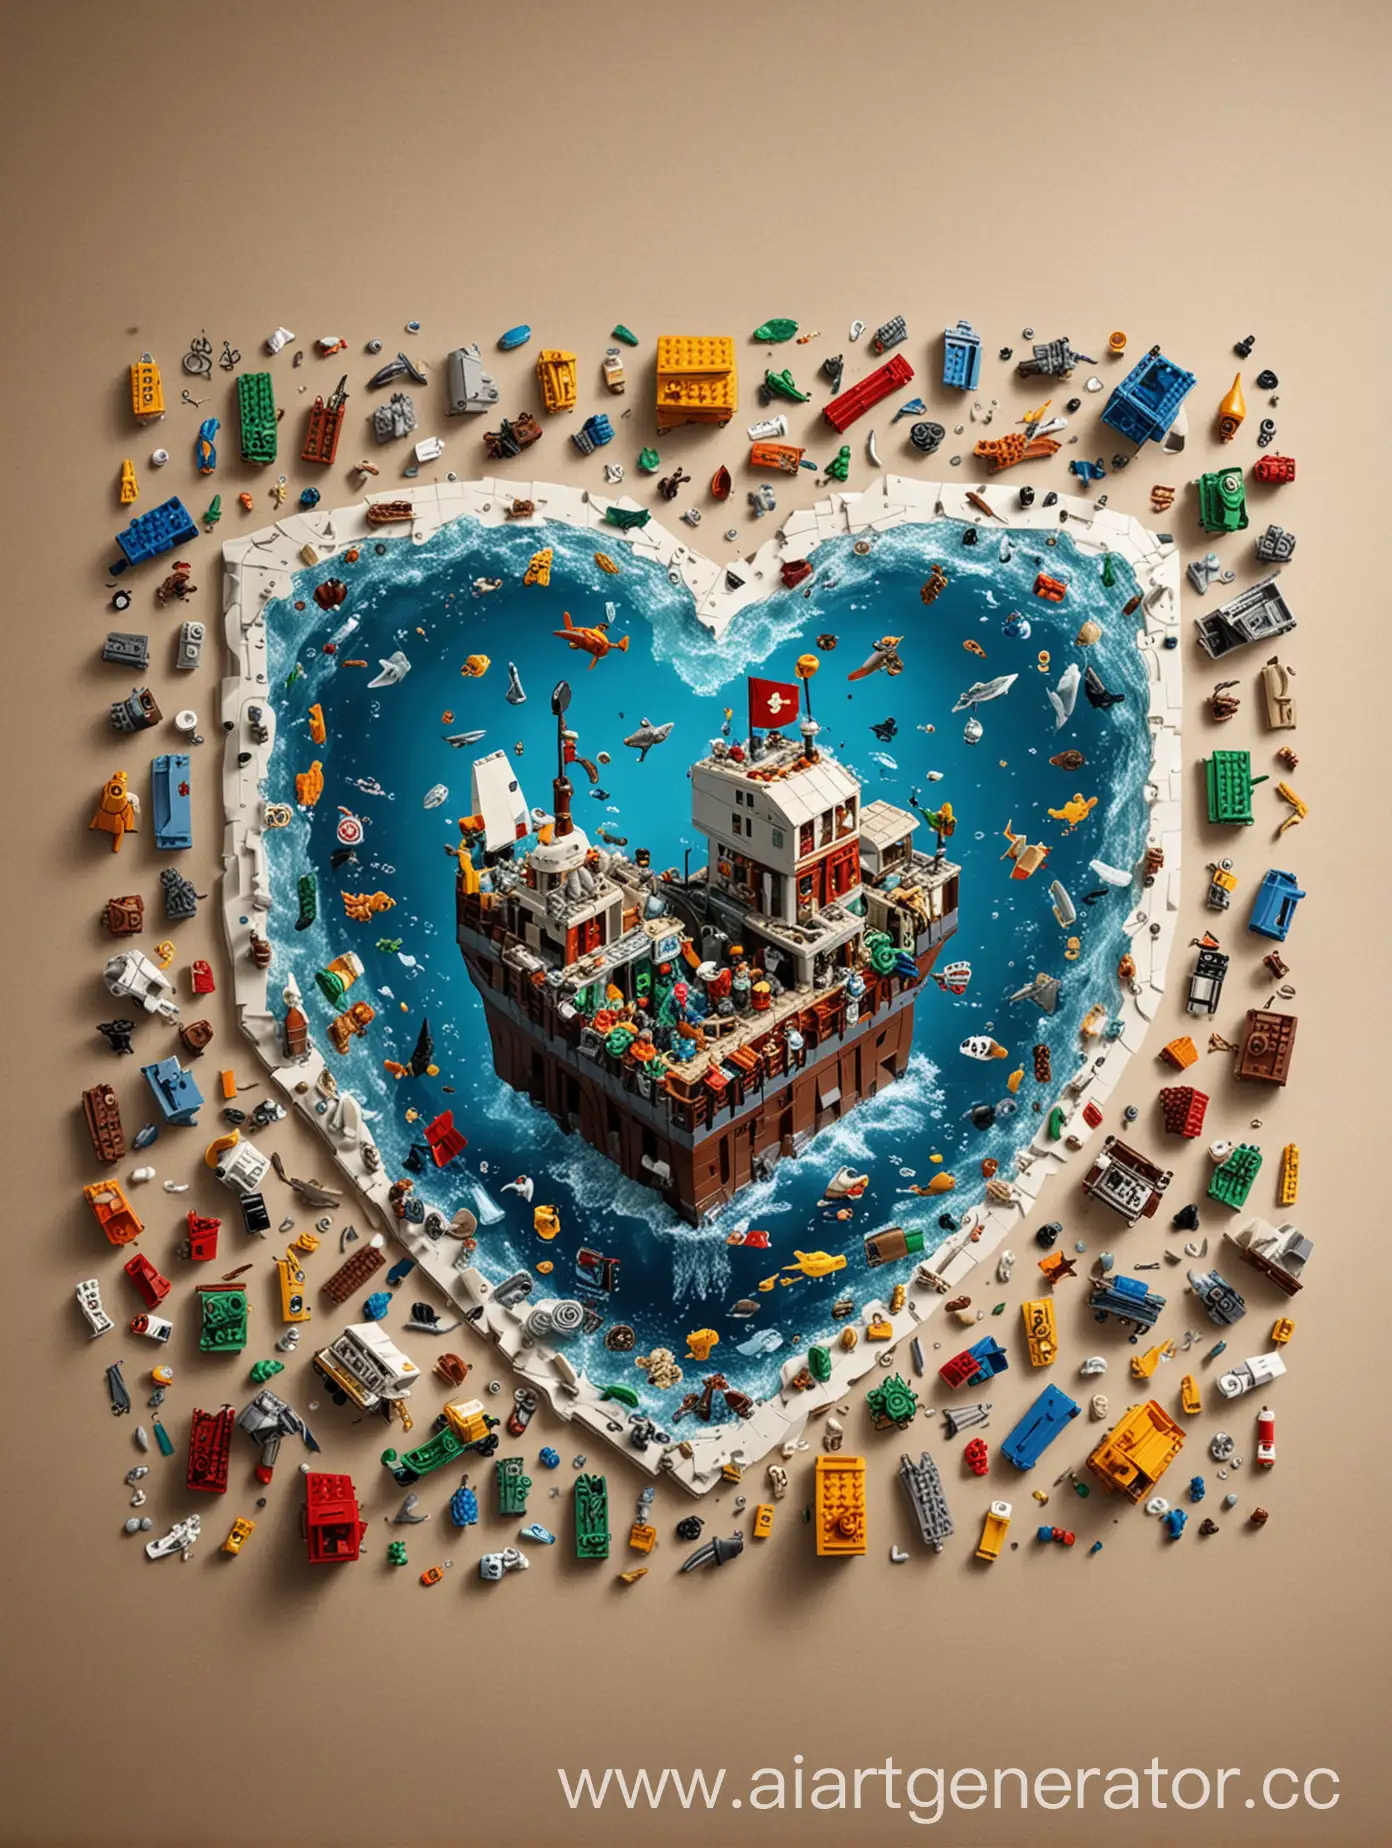 please make me a picture of a lego set on the theme, the theme of which will be the recycling of plastic from the ocean